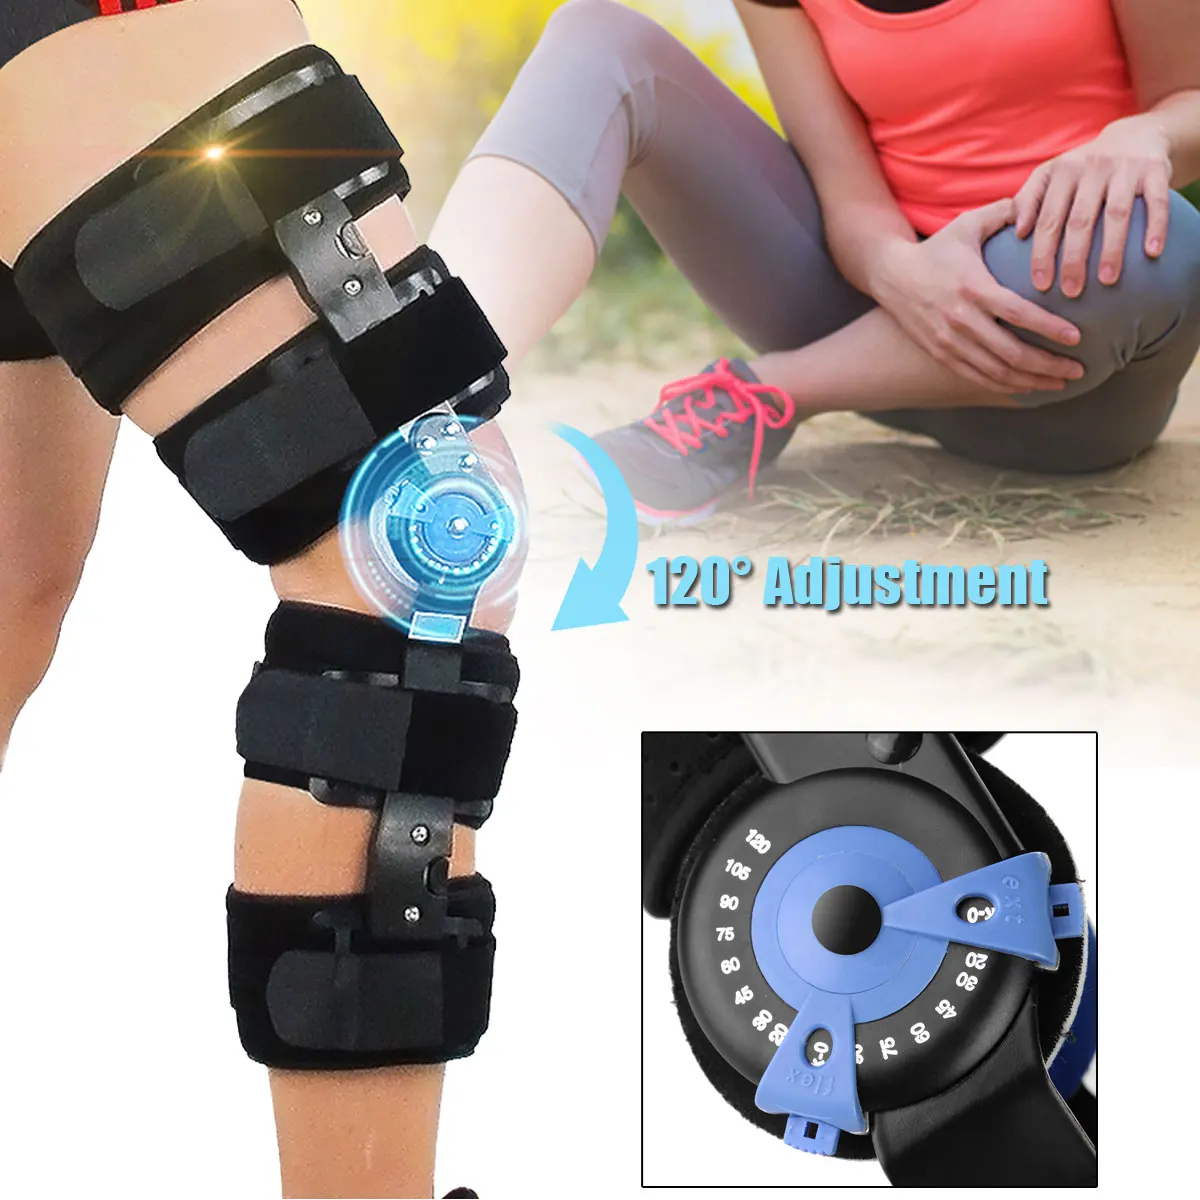 

Orthopedic Knee Joint Support 0-120 Degree Adjustable Hinged Knee Leg Brace Protector Bone Orthosis Ligament Care Joint Support